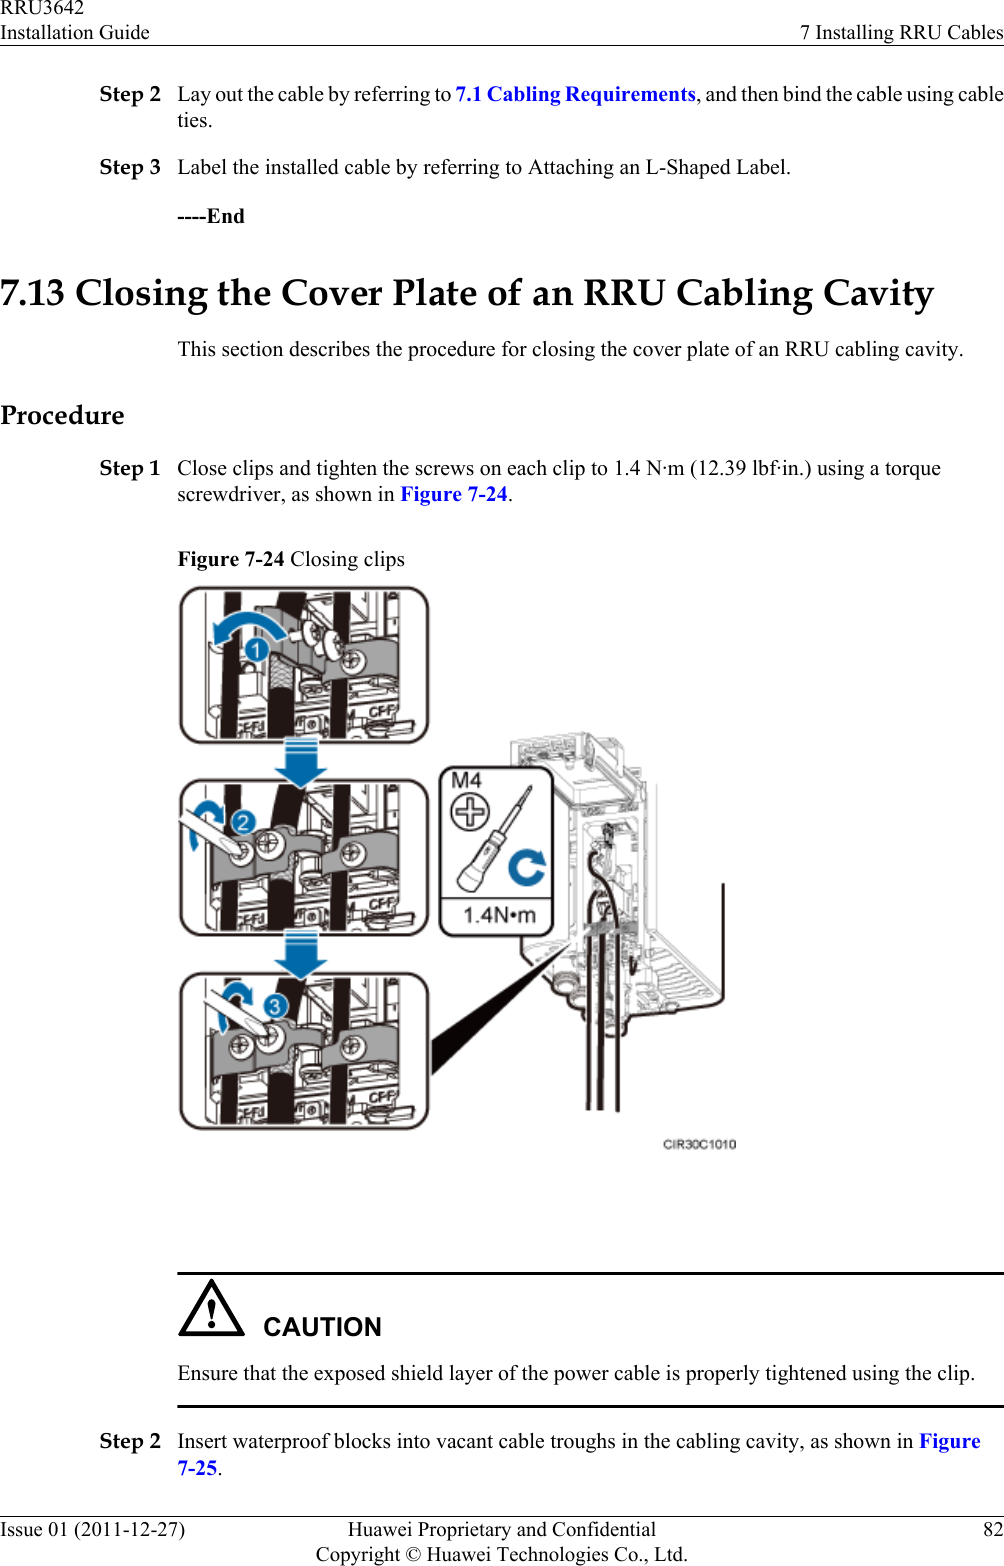 Step 2 Lay out the cable by referring to 7.1 Cabling Requirements, and then bind the cable using cableties.Step 3 Label the installed cable by referring to Attaching an L-Shaped Label.----End7.13 Closing the Cover Plate of an RRU Cabling CavityThis section describes the procedure for closing the cover plate of an RRU cabling cavity.ProcedureStep 1 Close clips and tighten the screws on each clip to 1.4 N·m (12.39 lbf·in.) using a torquescrewdriver, as shown in Figure 7-24.Figure 7-24 Closing clips CAUTIONEnsure that the exposed shield layer of the power cable is properly tightened using the clip.Step 2 Insert waterproof blocks into vacant cable troughs in the cabling cavity, as shown in Figure7-25.RRU3642Installation Guide 7 Installing RRU CablesIssue 01 (2011-12-27) Huawei Proprietary and ConfidentialCopyright © Huawei Technologies Co., Ltd.82